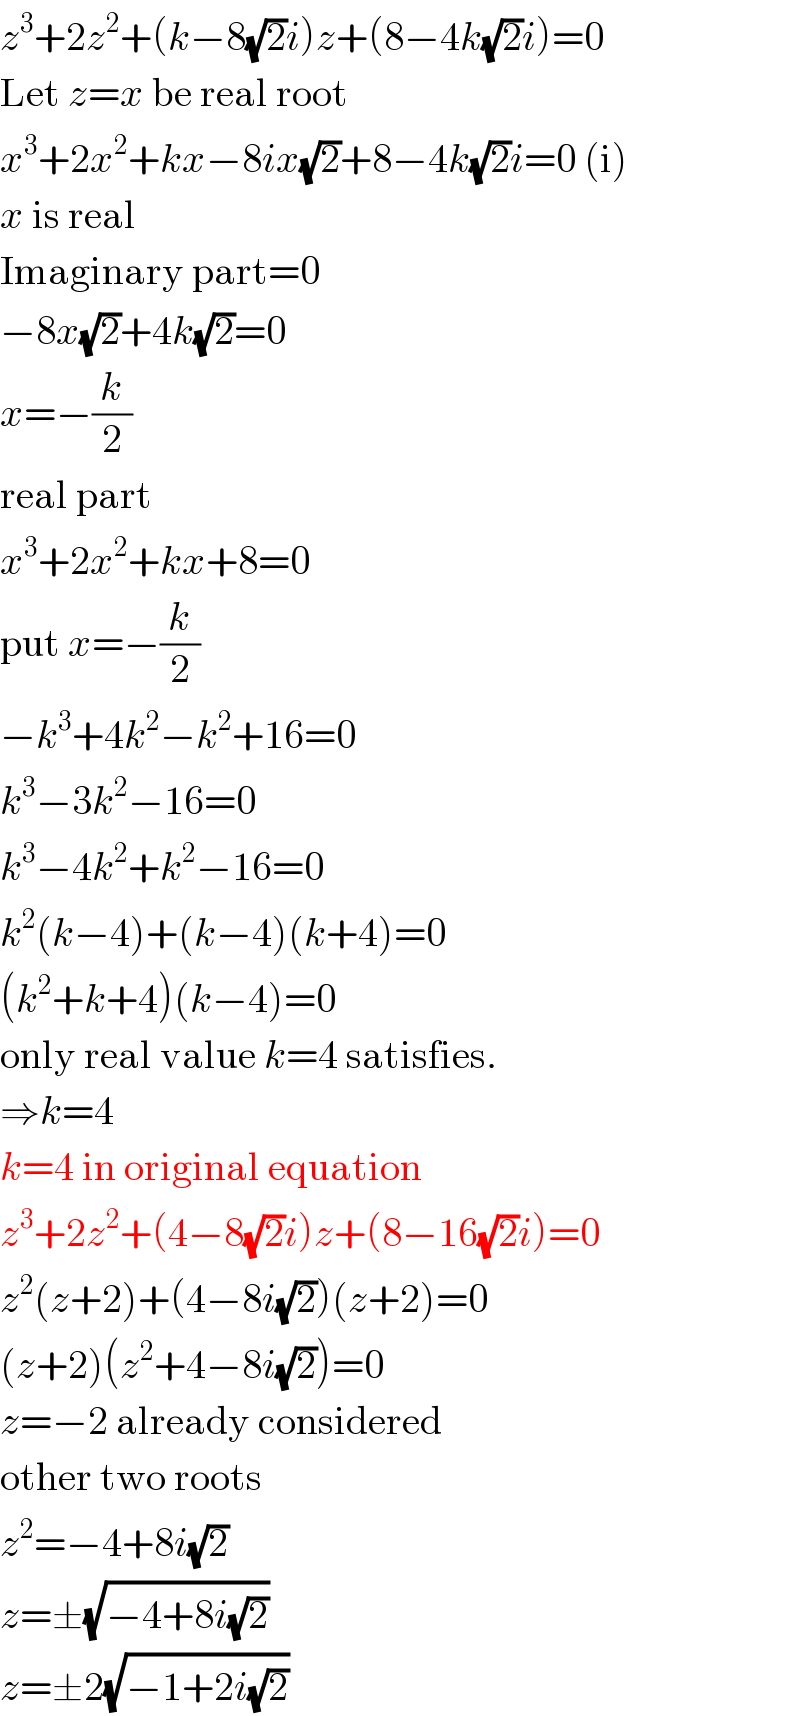 z^3 +2z^2 +(k−8(√2)i)z+(8−4k(√2)i)=0  Let z=x be real root  x^3 +2x^2 +kx−8ix(√2)+8−4k(√2)i=0 (i)  x is real  Imaginary part=0  −8x(√2)+4k(√2)=0  x=−(k/2)  real part  x^3 +2x^2 +kx+8=0  put x=−(k/2)  −k^3 +4k^2 −k^2 +16=0  k^3 −3k^2 −16=0  k^3 −4k^2 +k^2 −16=0  k^2 (k−4)+(k−4)(k+4)=0  (k^2 +k+4)(k−4)=0  only real value k=4 satisfies.  ⇒k=4  k=4 in original equation  z^3 +2z^2 +(4−8(√2)i)z+(8−16(√2)i)=0  z^2 (z+2)+(4−8i(√2))(z+2)=0  (z+2)(z^2 +4−8i(√2))=0  z=−2 already considered  other two roots  z^2 =−4+8i(√2)  z=±(√(−4+8i(√2)))  z=±2(√(−1+2i(√2)))  